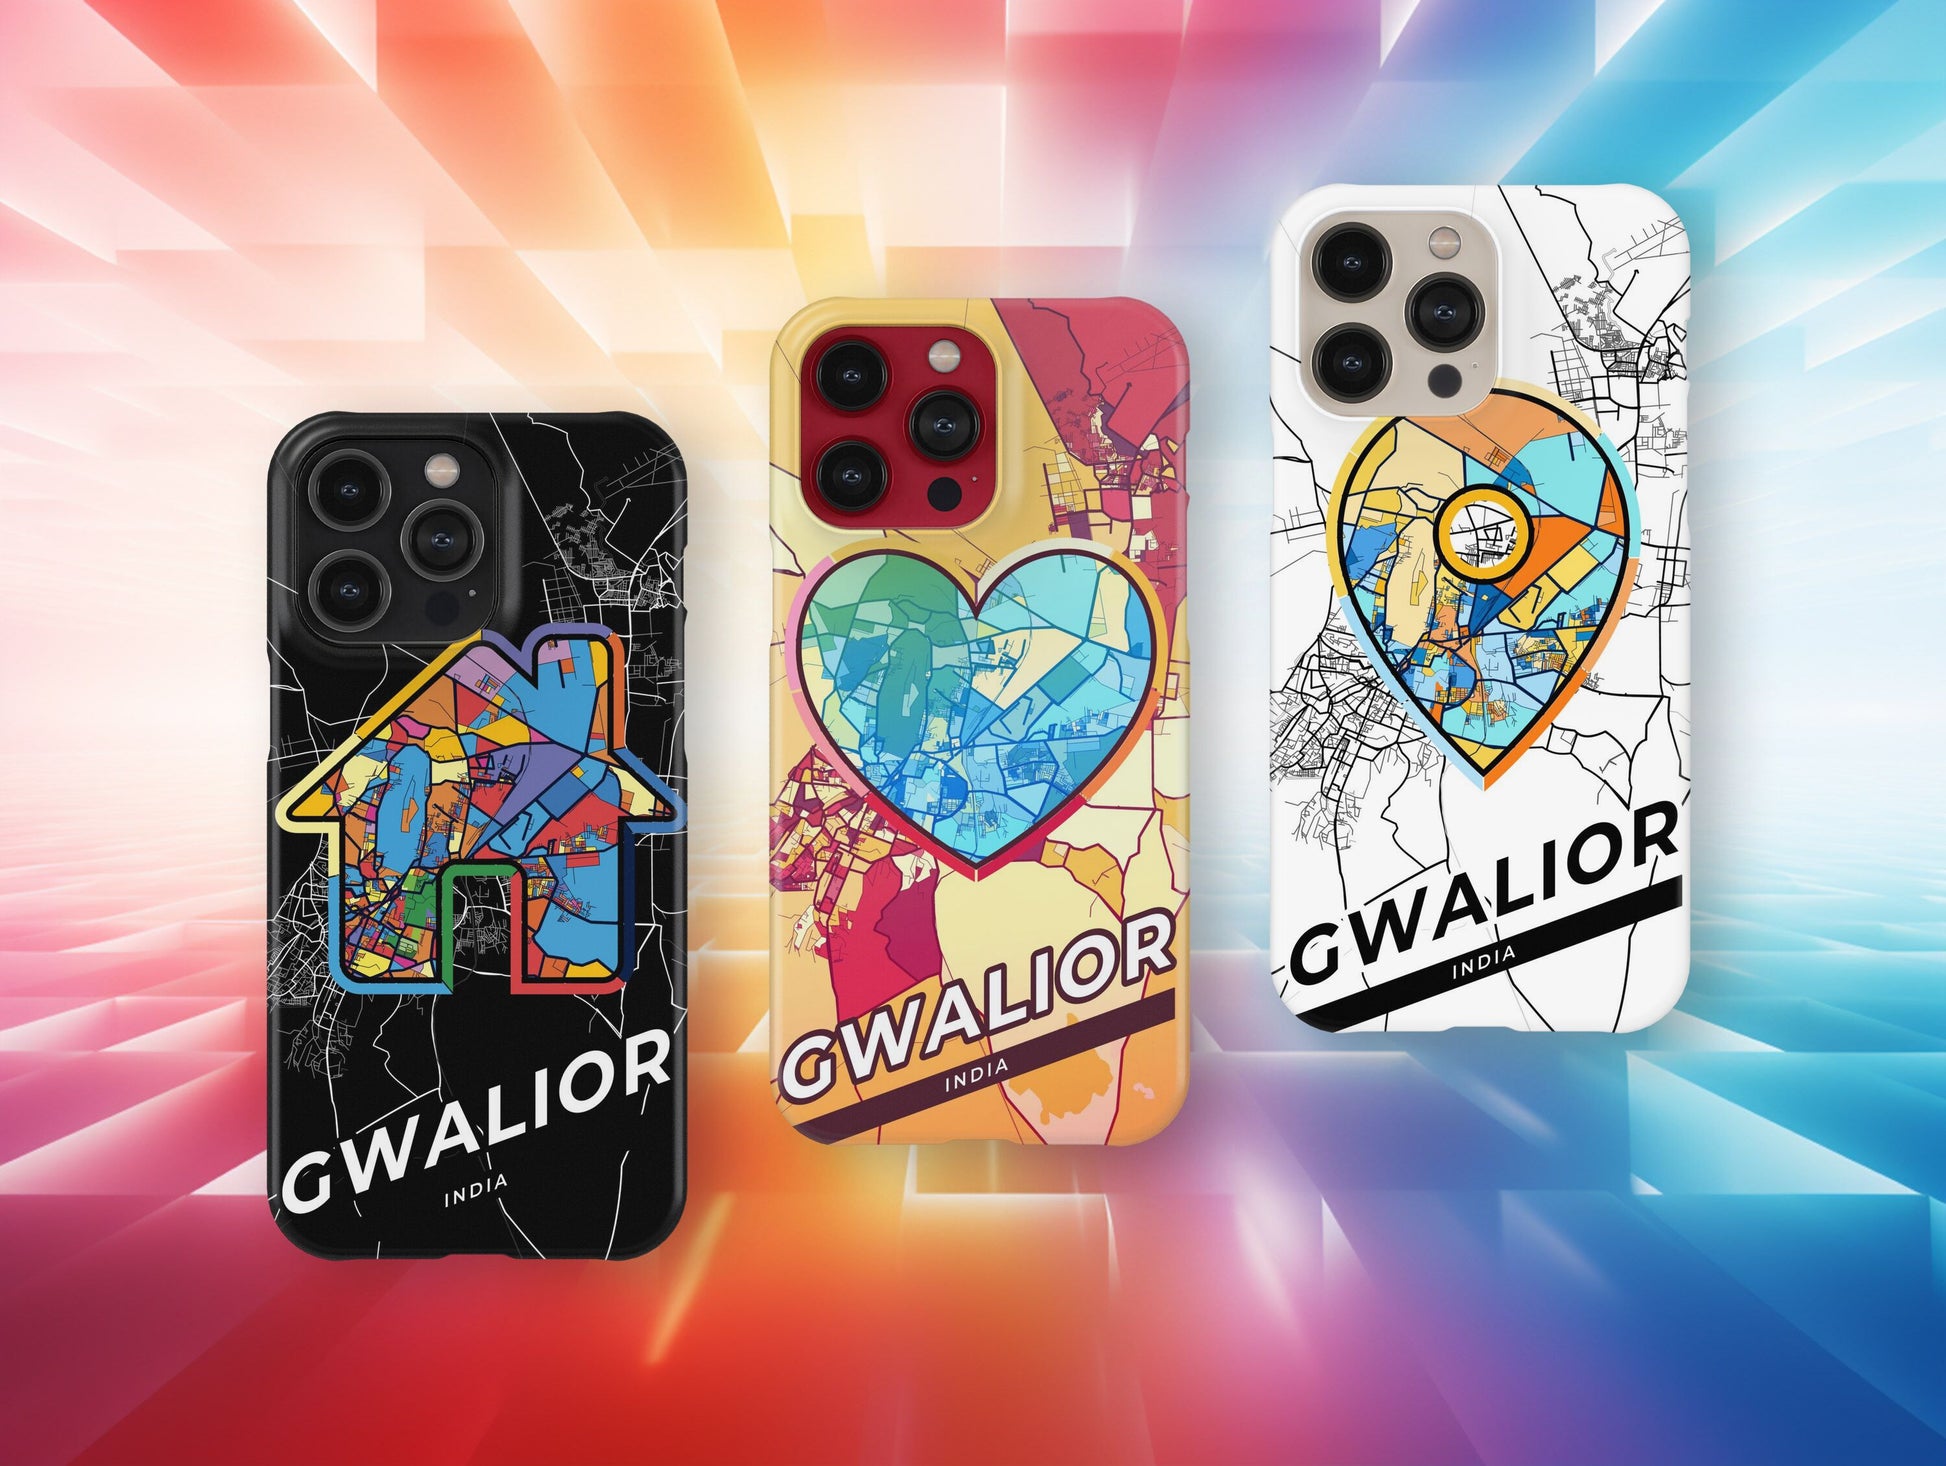 Gwalior India slim phone case with colorful icon. Birthday, wedding or housewarming gift. Couple match cases.